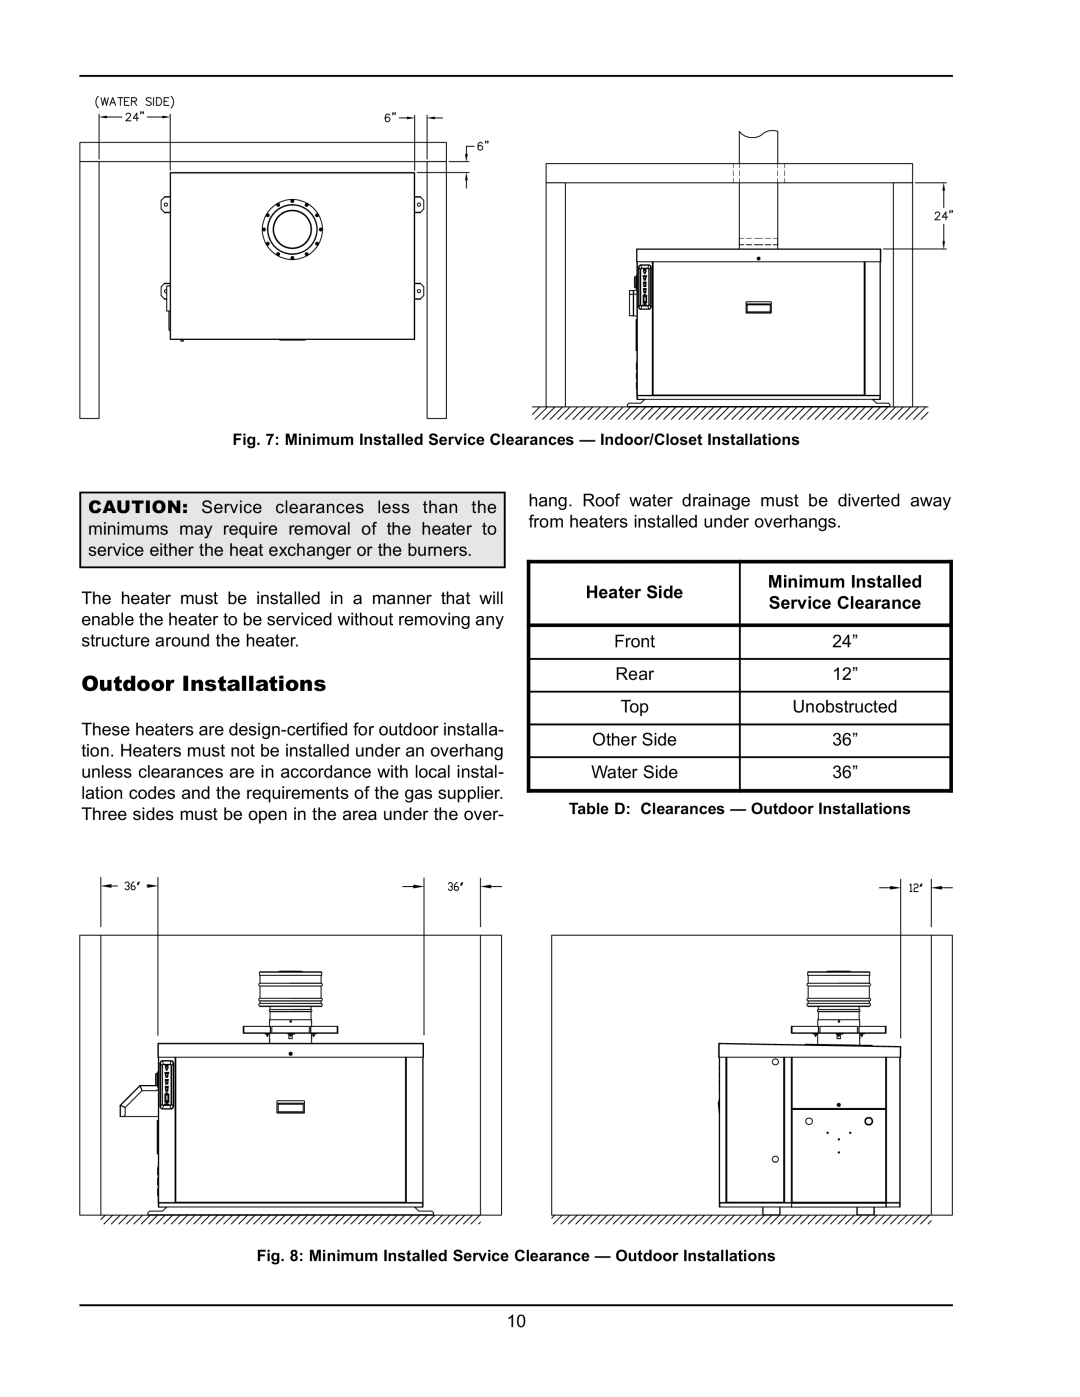 Raypak HD401, HD101 operating instructions Outdoor Installations 